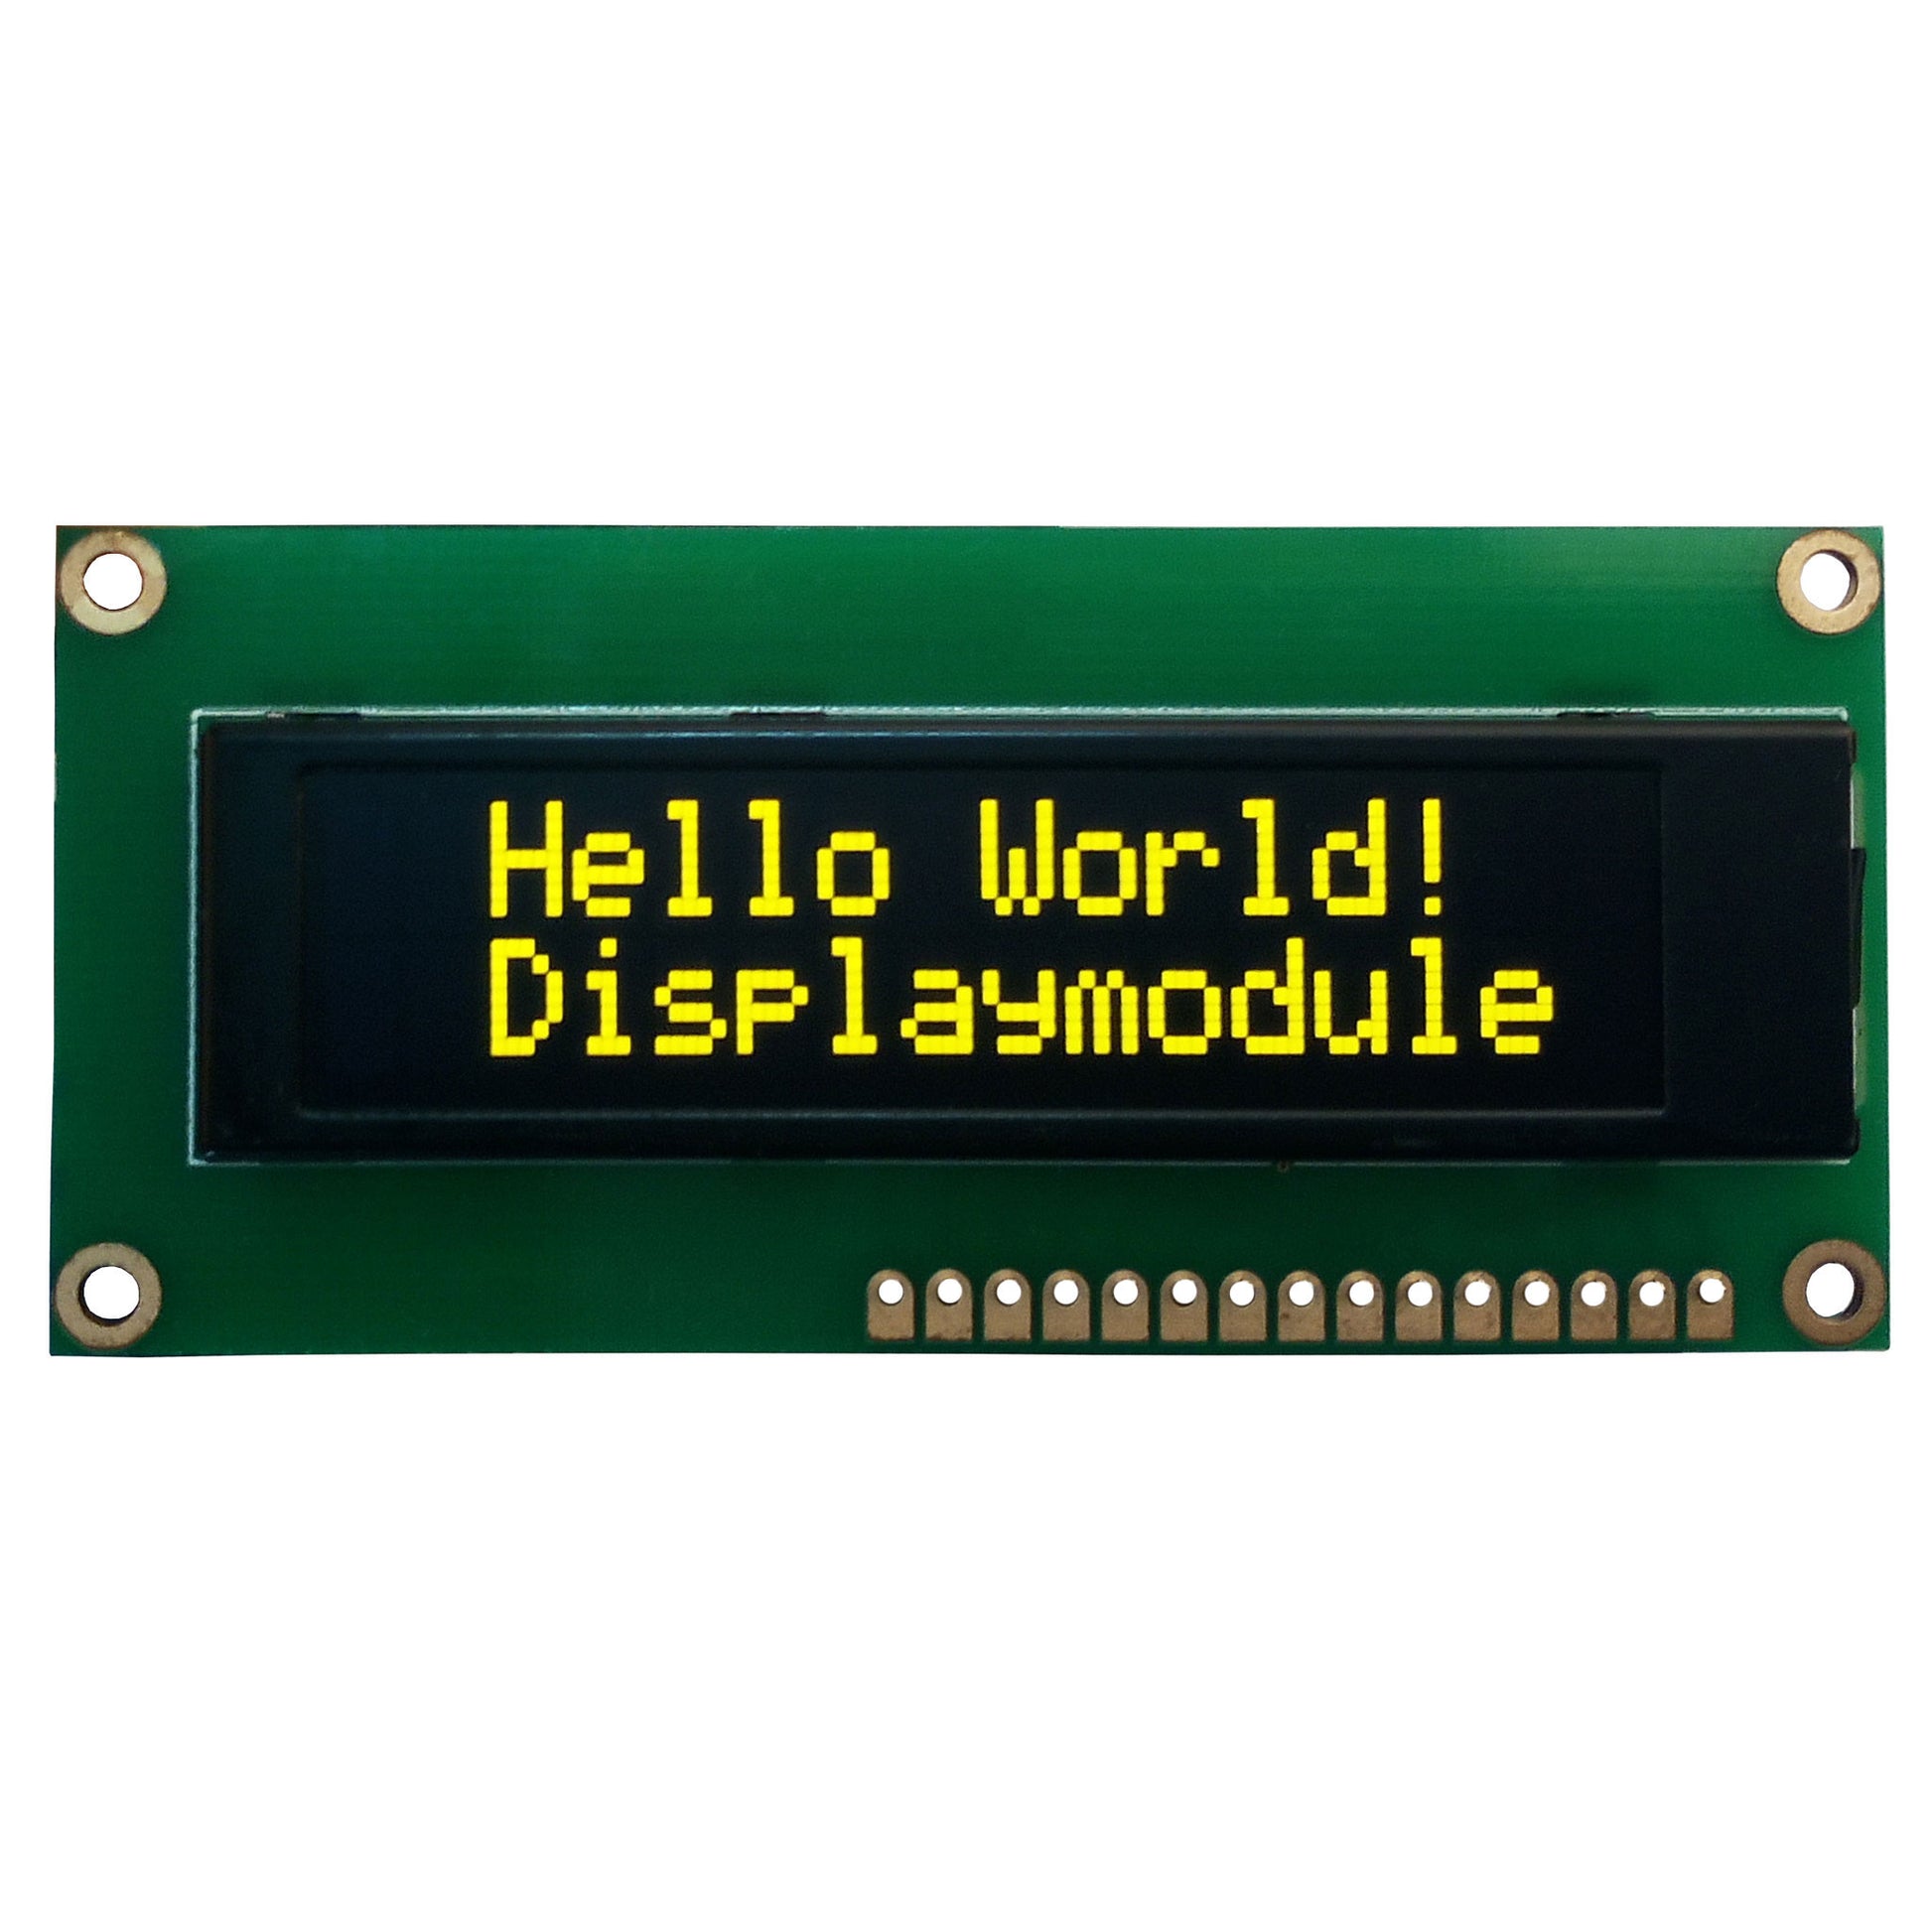 16x2 yellow character OLED display with MCU, SPI, and I2C interfaces